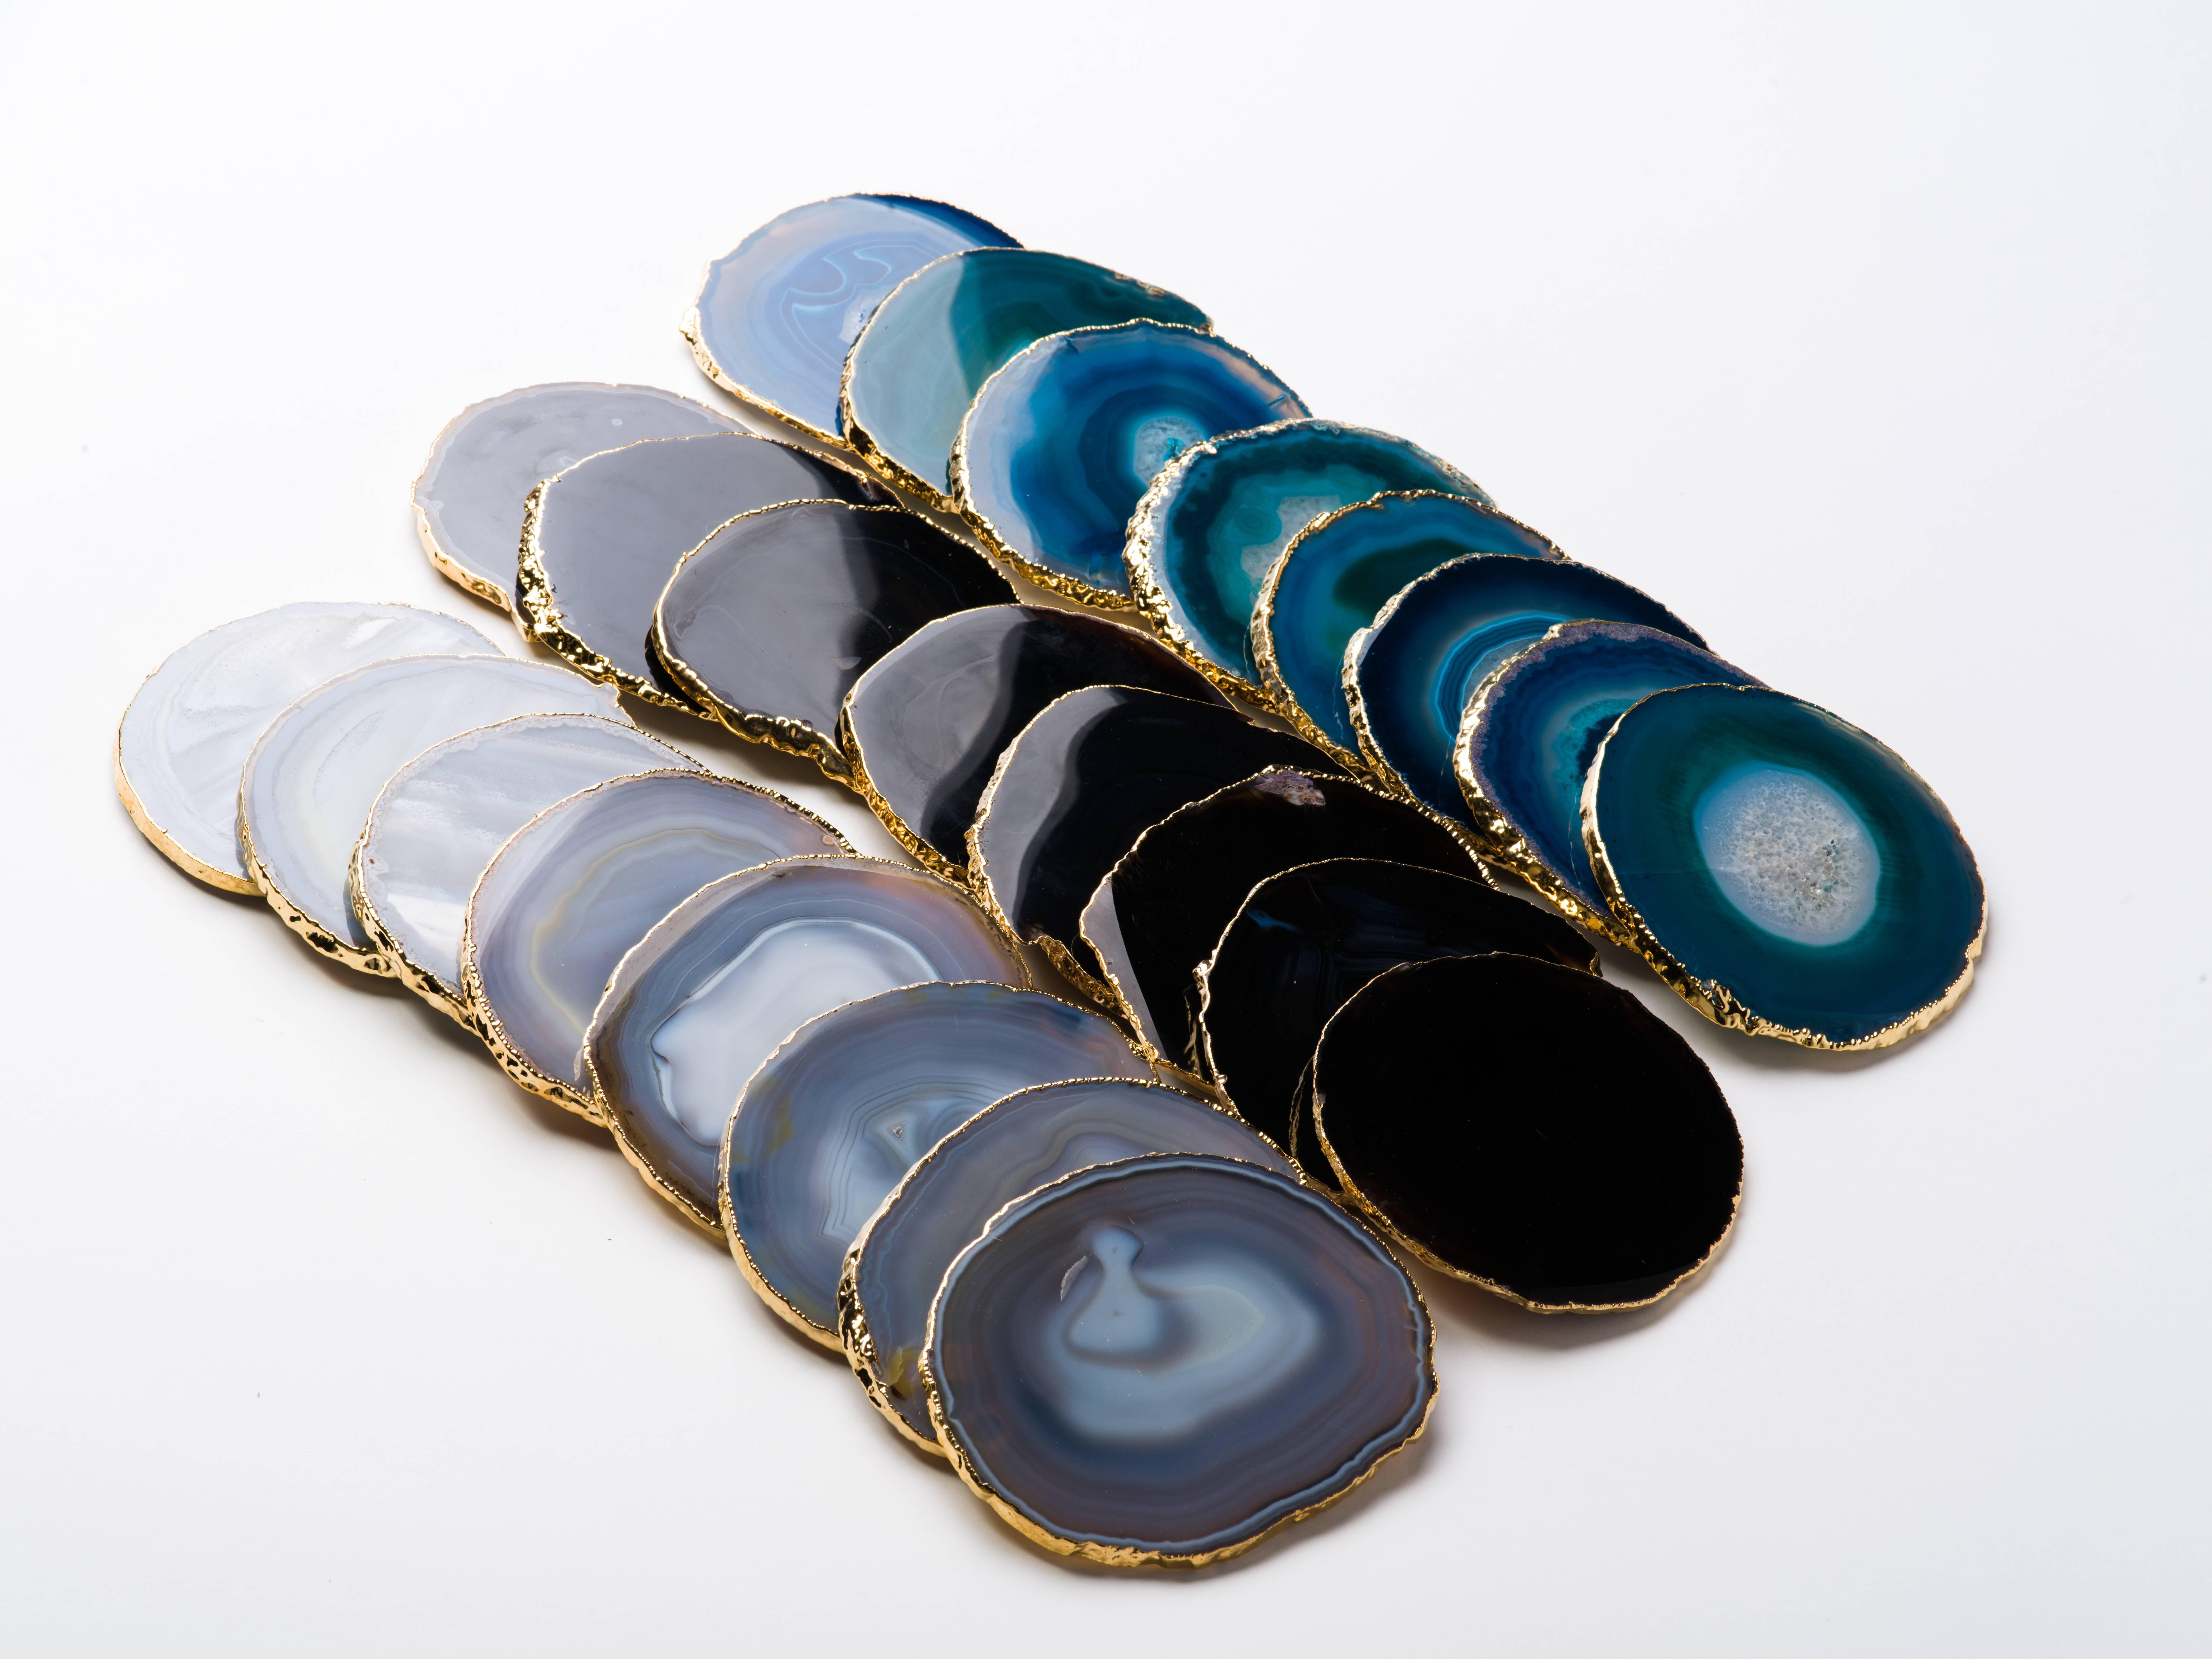 Agate Gemstone Coasters Wrapped in 24-Karat Gold, Set / 8 In Excellent Condition For Sale In Fort Lauderdale, FL